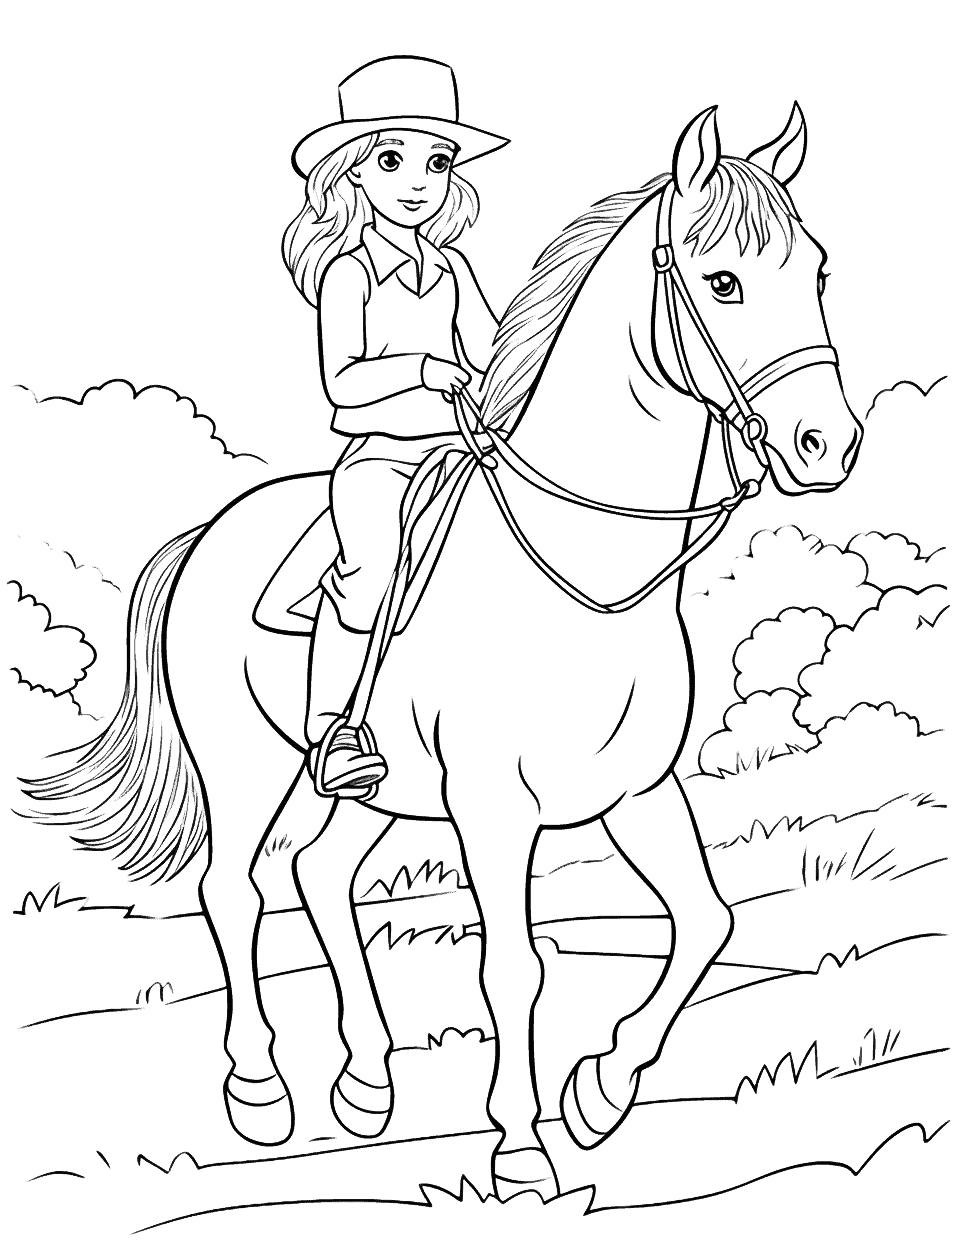 Rider on the Trail Horse Coloring Page - A rider and her horse enjoying the great outdoors.